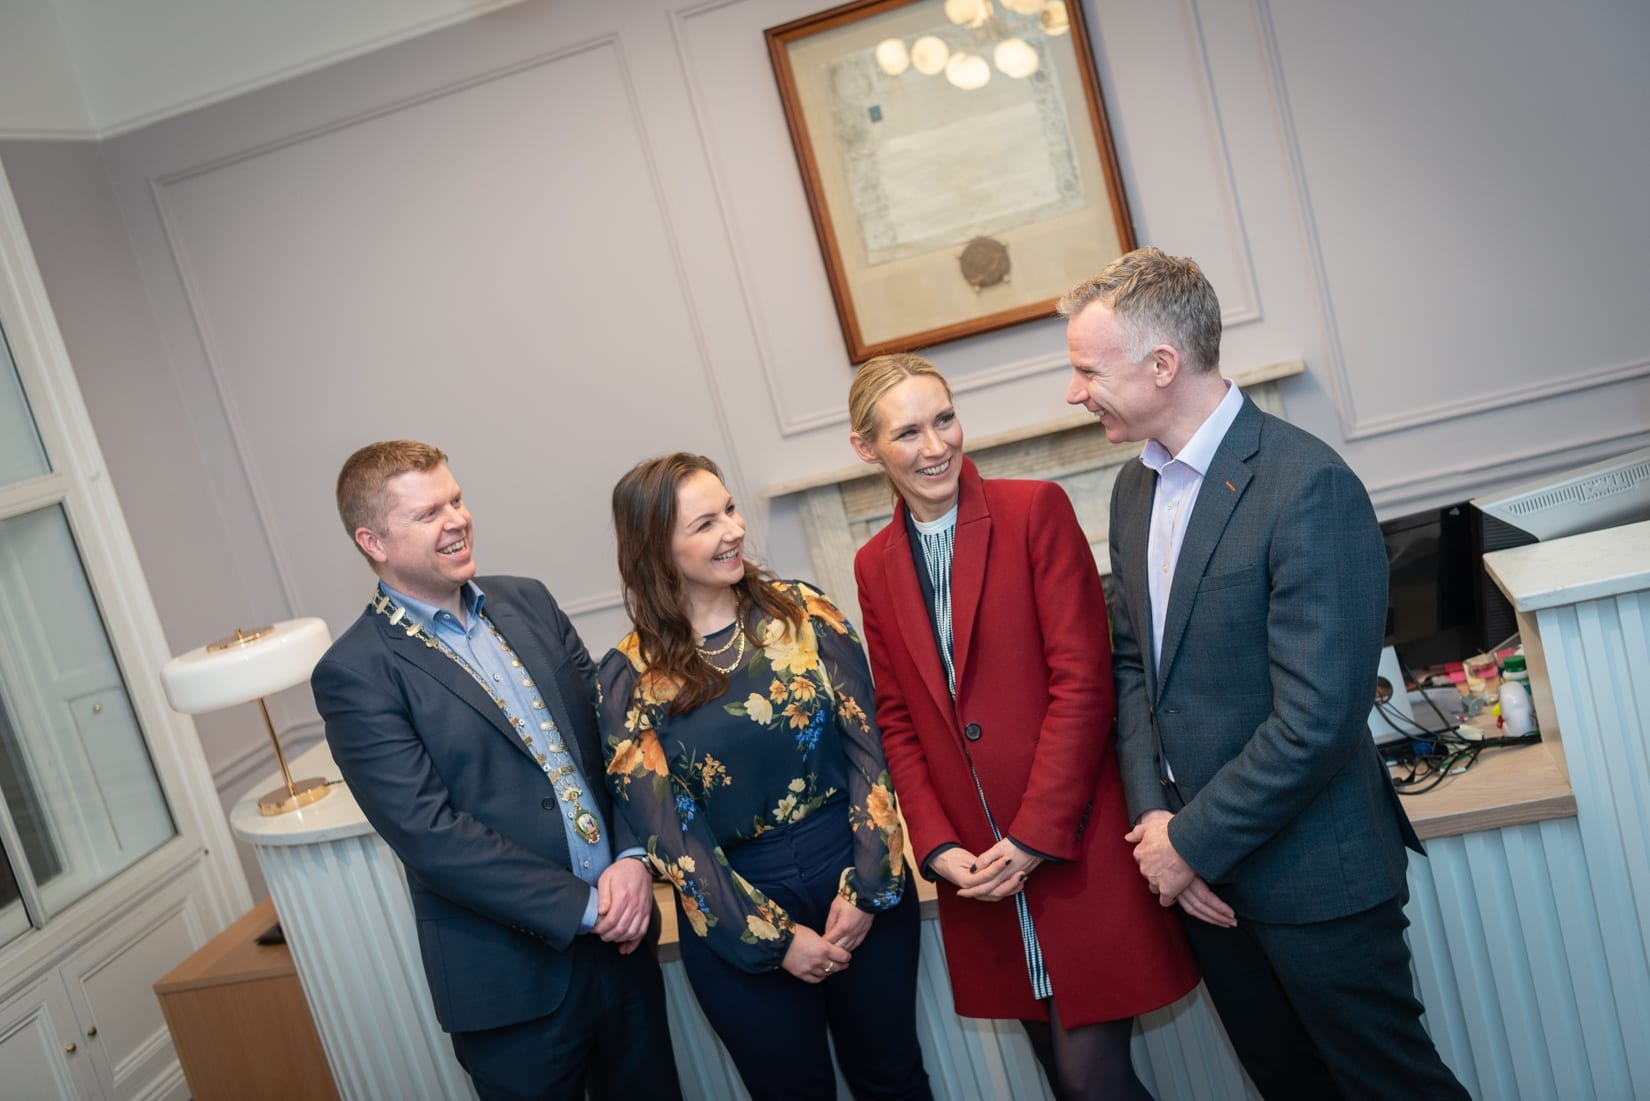 No repro fee-Limerick Chamber AGM 2020 which was held in Limerick Chamber Boardroom on Thursday 27th February - From Left to Right:  Eoin Ryan - President Limerick Chamber, Dr Caitriona Cahill - Limerick Chamber ,Dee Ryan - CEO Limerick Chamber, Dave Jefferies - Vice President Limerick Chamber, 
Photo credit Shauna Kennedy